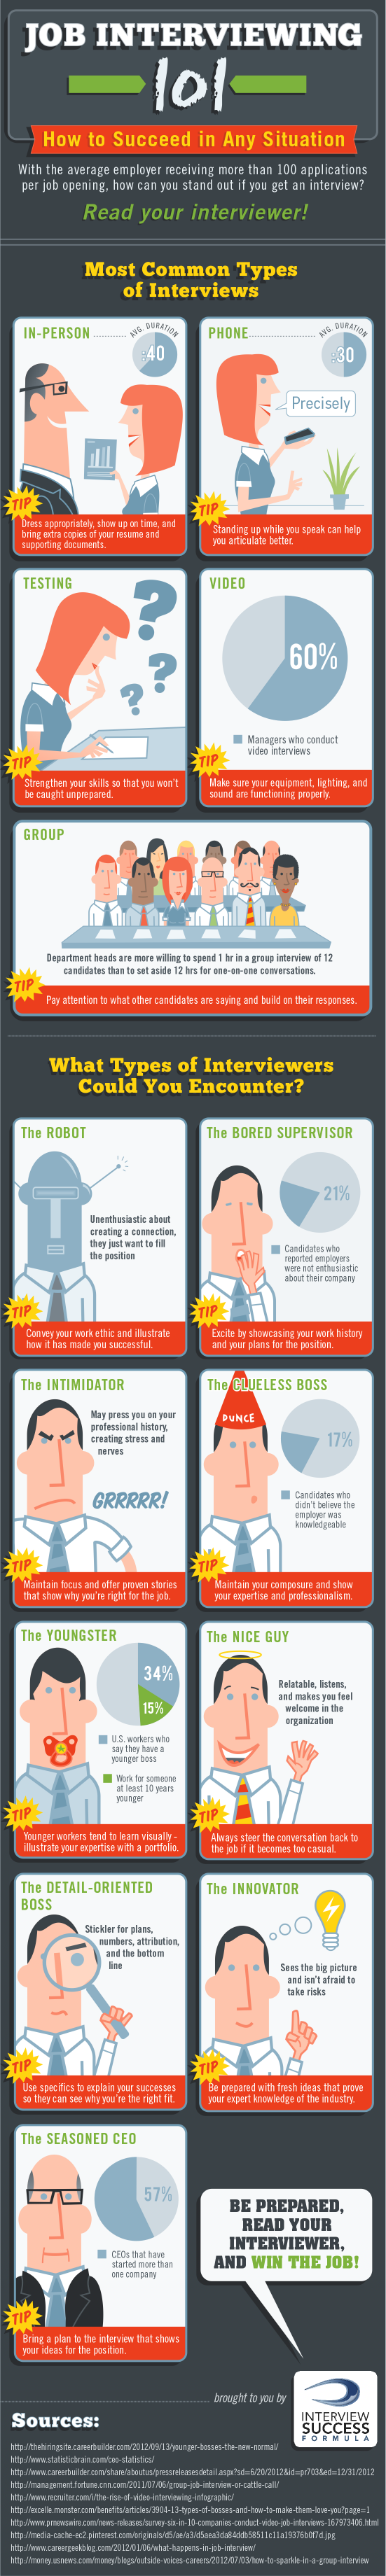 Infographic - Interview Advice